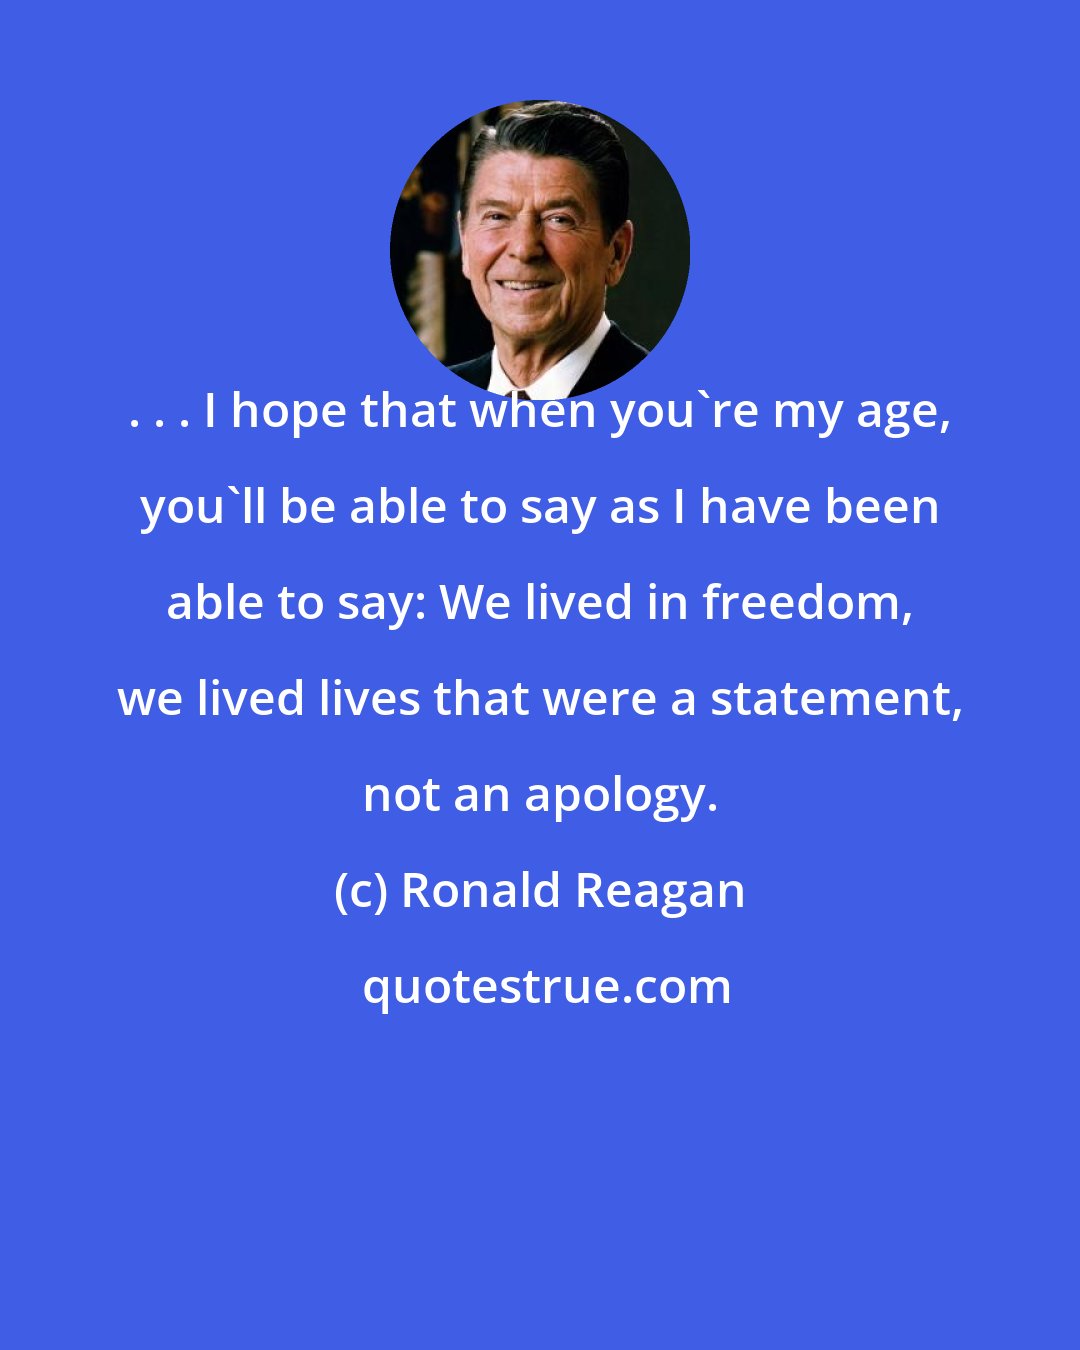 Ronald Reagan: . . . I hope that when you're my age, you'll be able to say as I have been able to say: We lived in freedom, we lived lives that were a statement, not an apology.